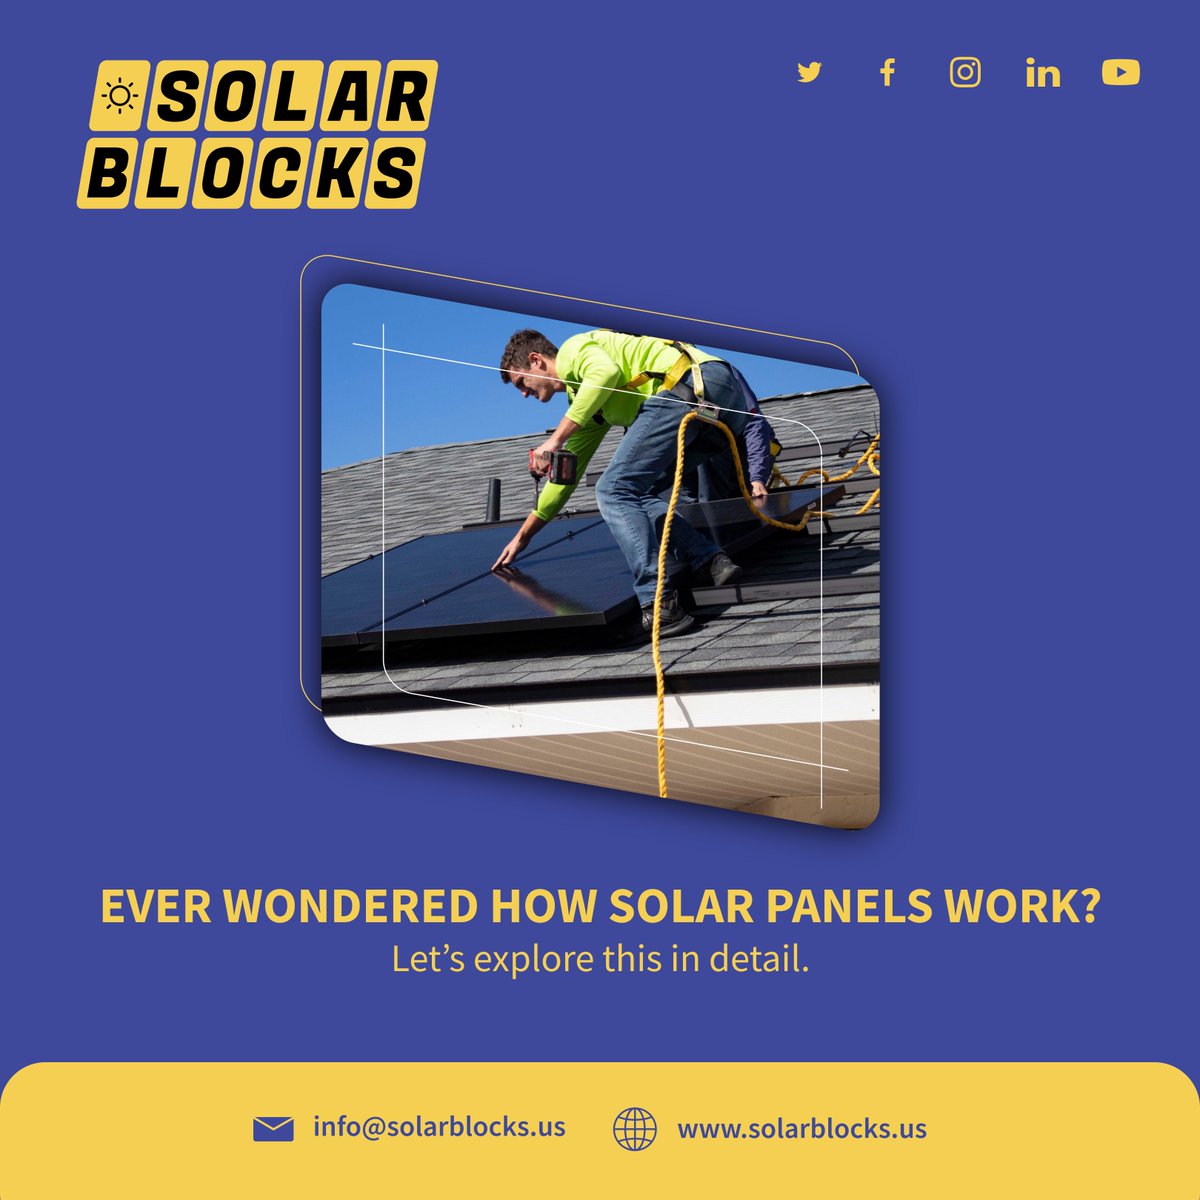 Ever wondered how solar panels work?

Read this thread to explore in detail. 

Take the first step towards a sustainable future with Solarblocks.

#Solarblocks #solar #solarpanels #solarinstallers #solarinstallation #solarpower #solarenergy #solarrooftop #newyork #us